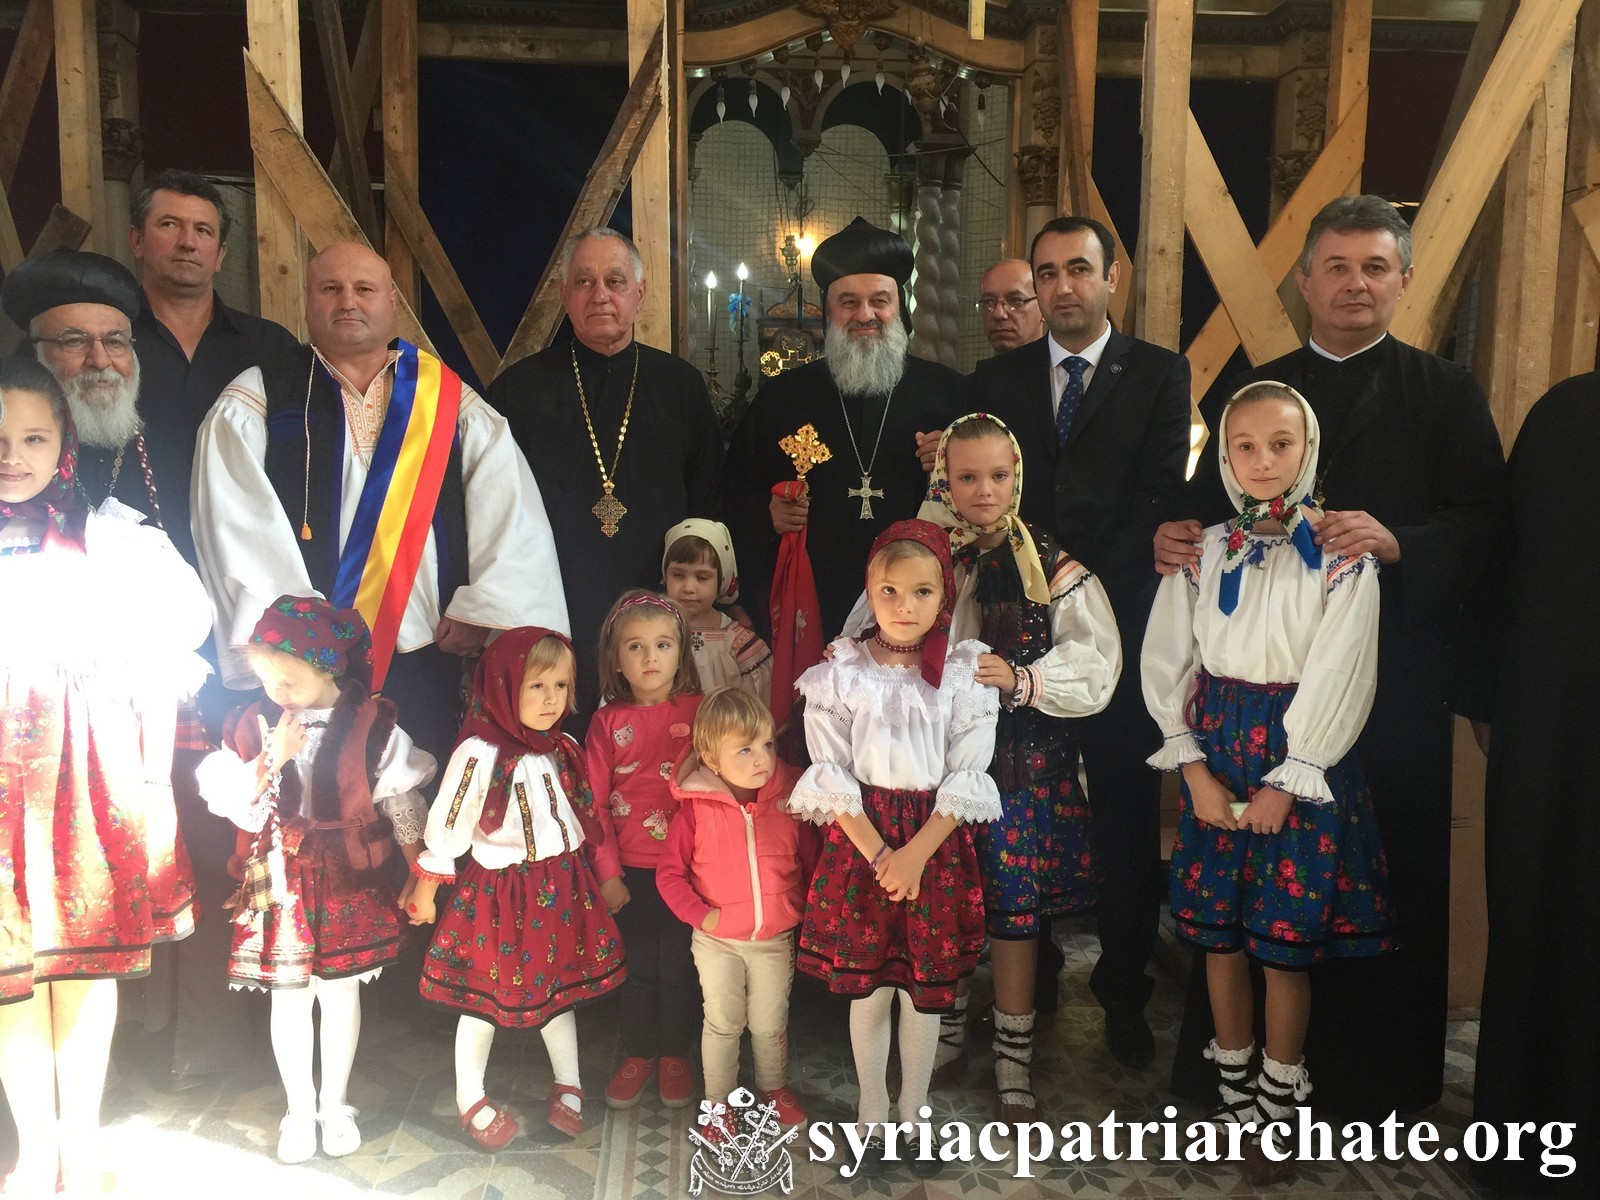 Patriarch Mor Ignatius Aphrem II Visits St. Michael & St. Gabriel Monastery and the Merry Cemetry in Romania